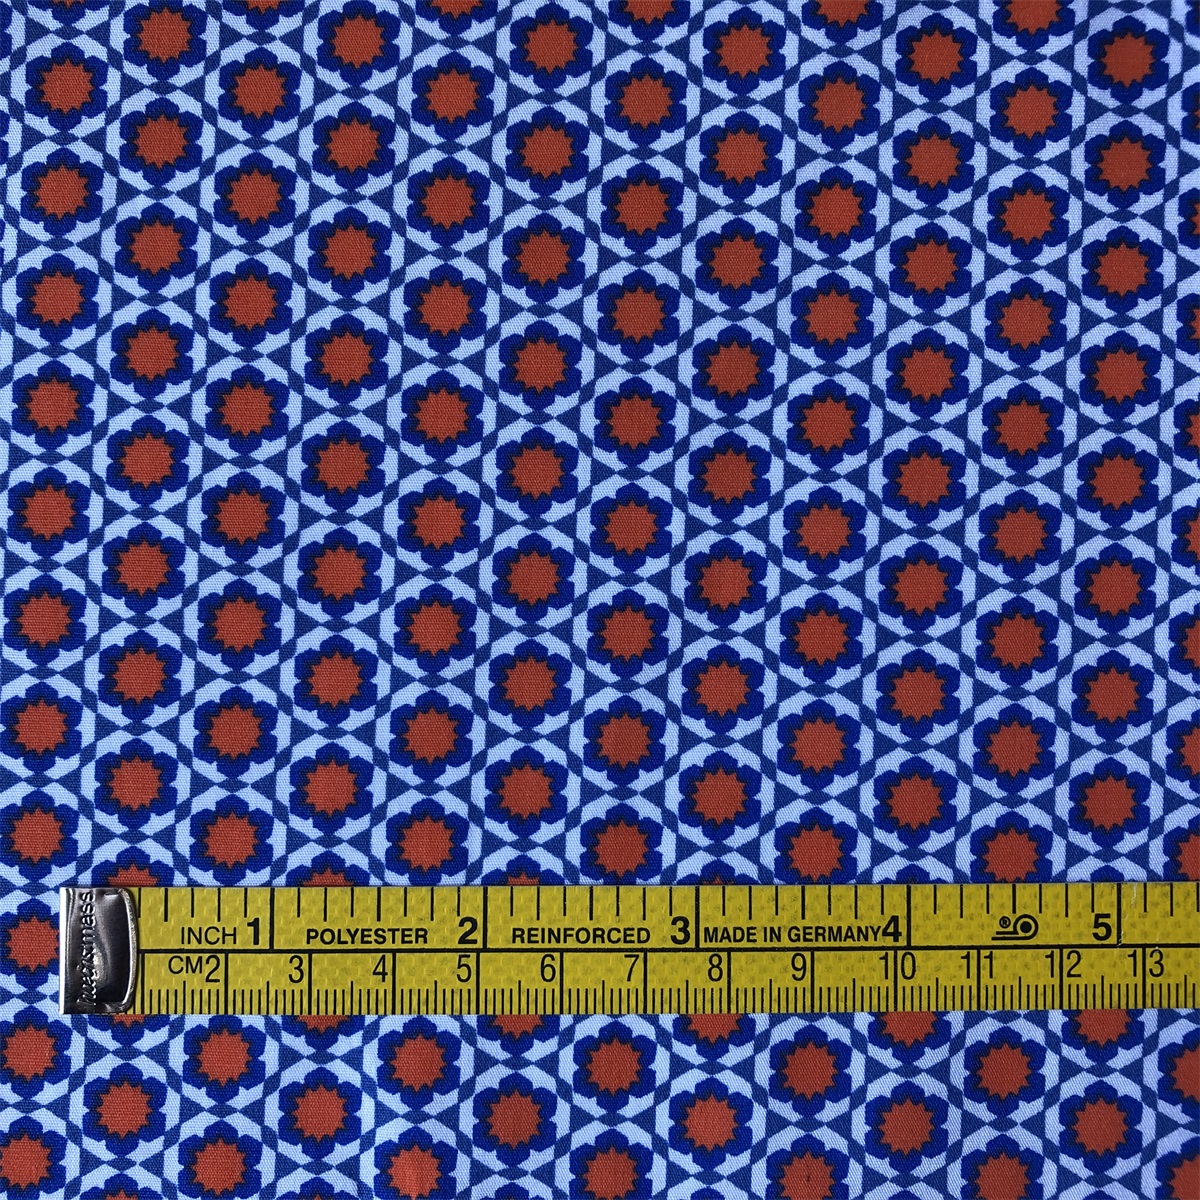 Sun-rising Textile Cotton Printed fabric new fashionable pattern 100% cotton poplin printed fabric for men's casual shirts